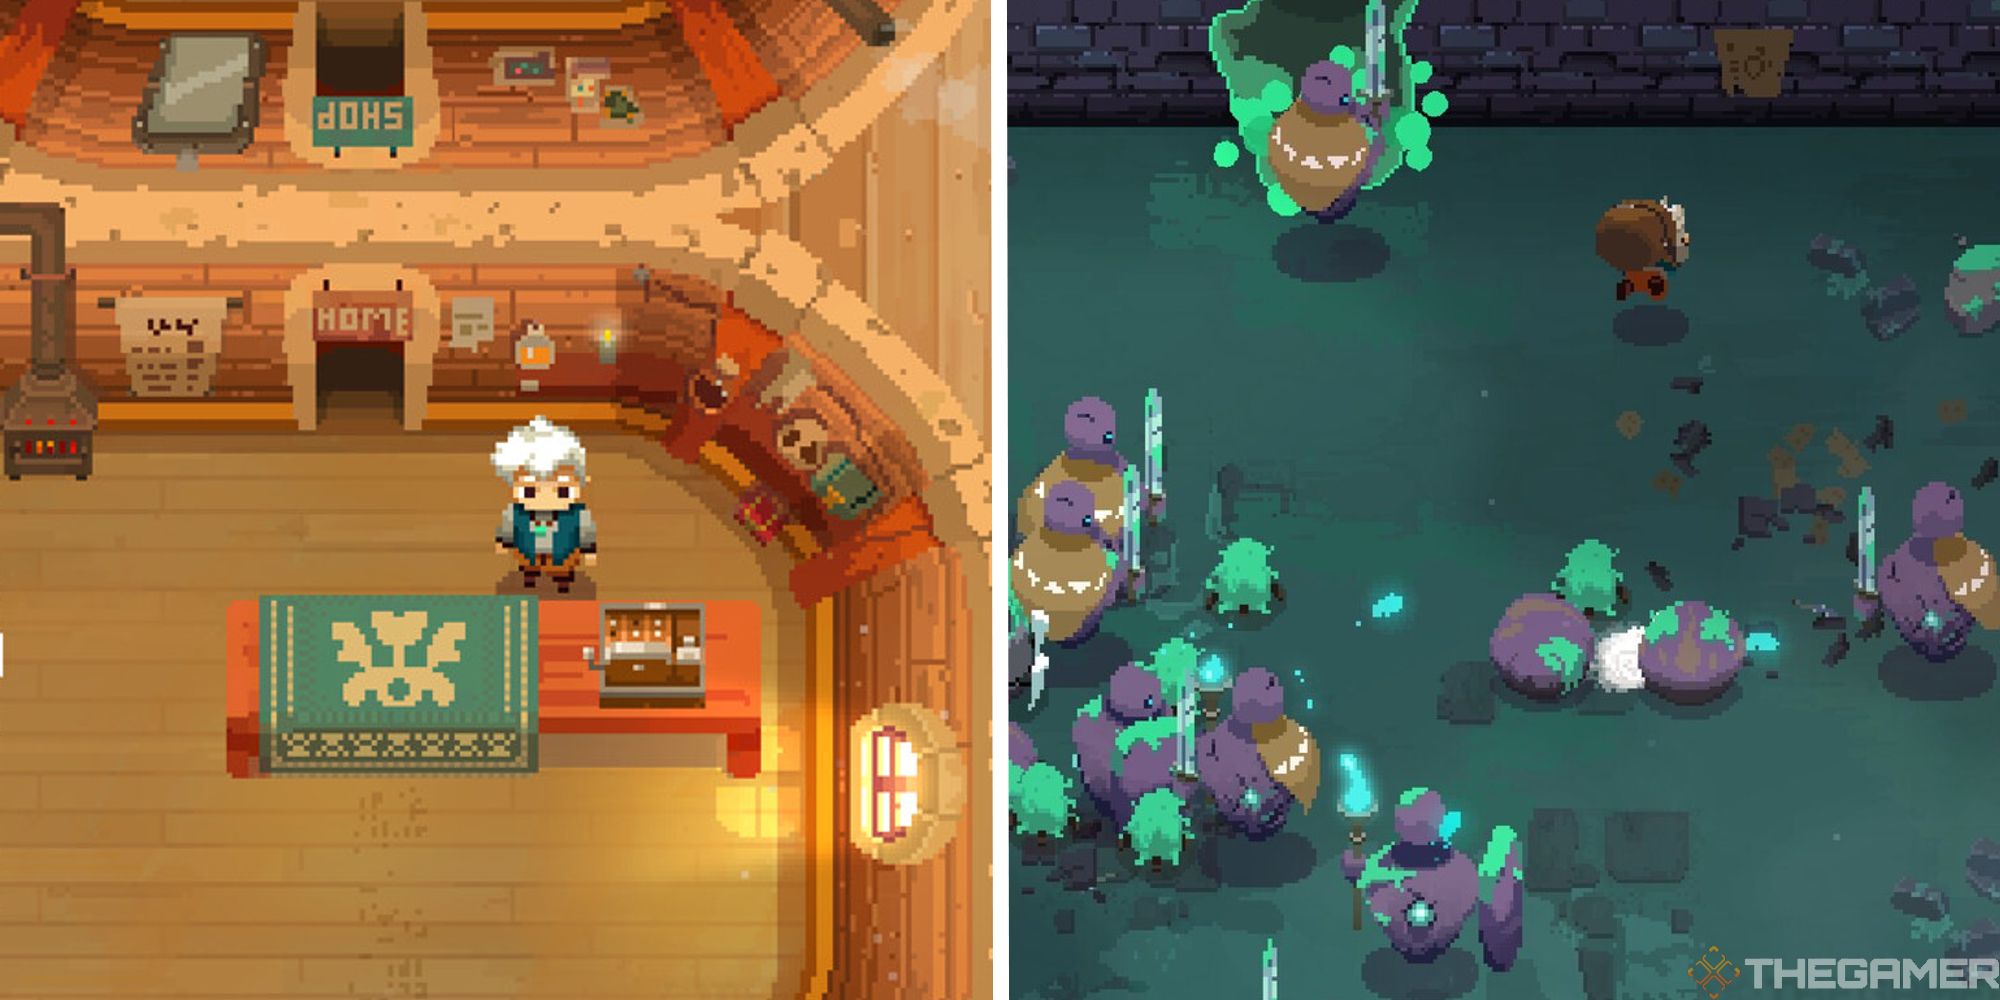 split image showing will at work in shop next to image of will in dungeon